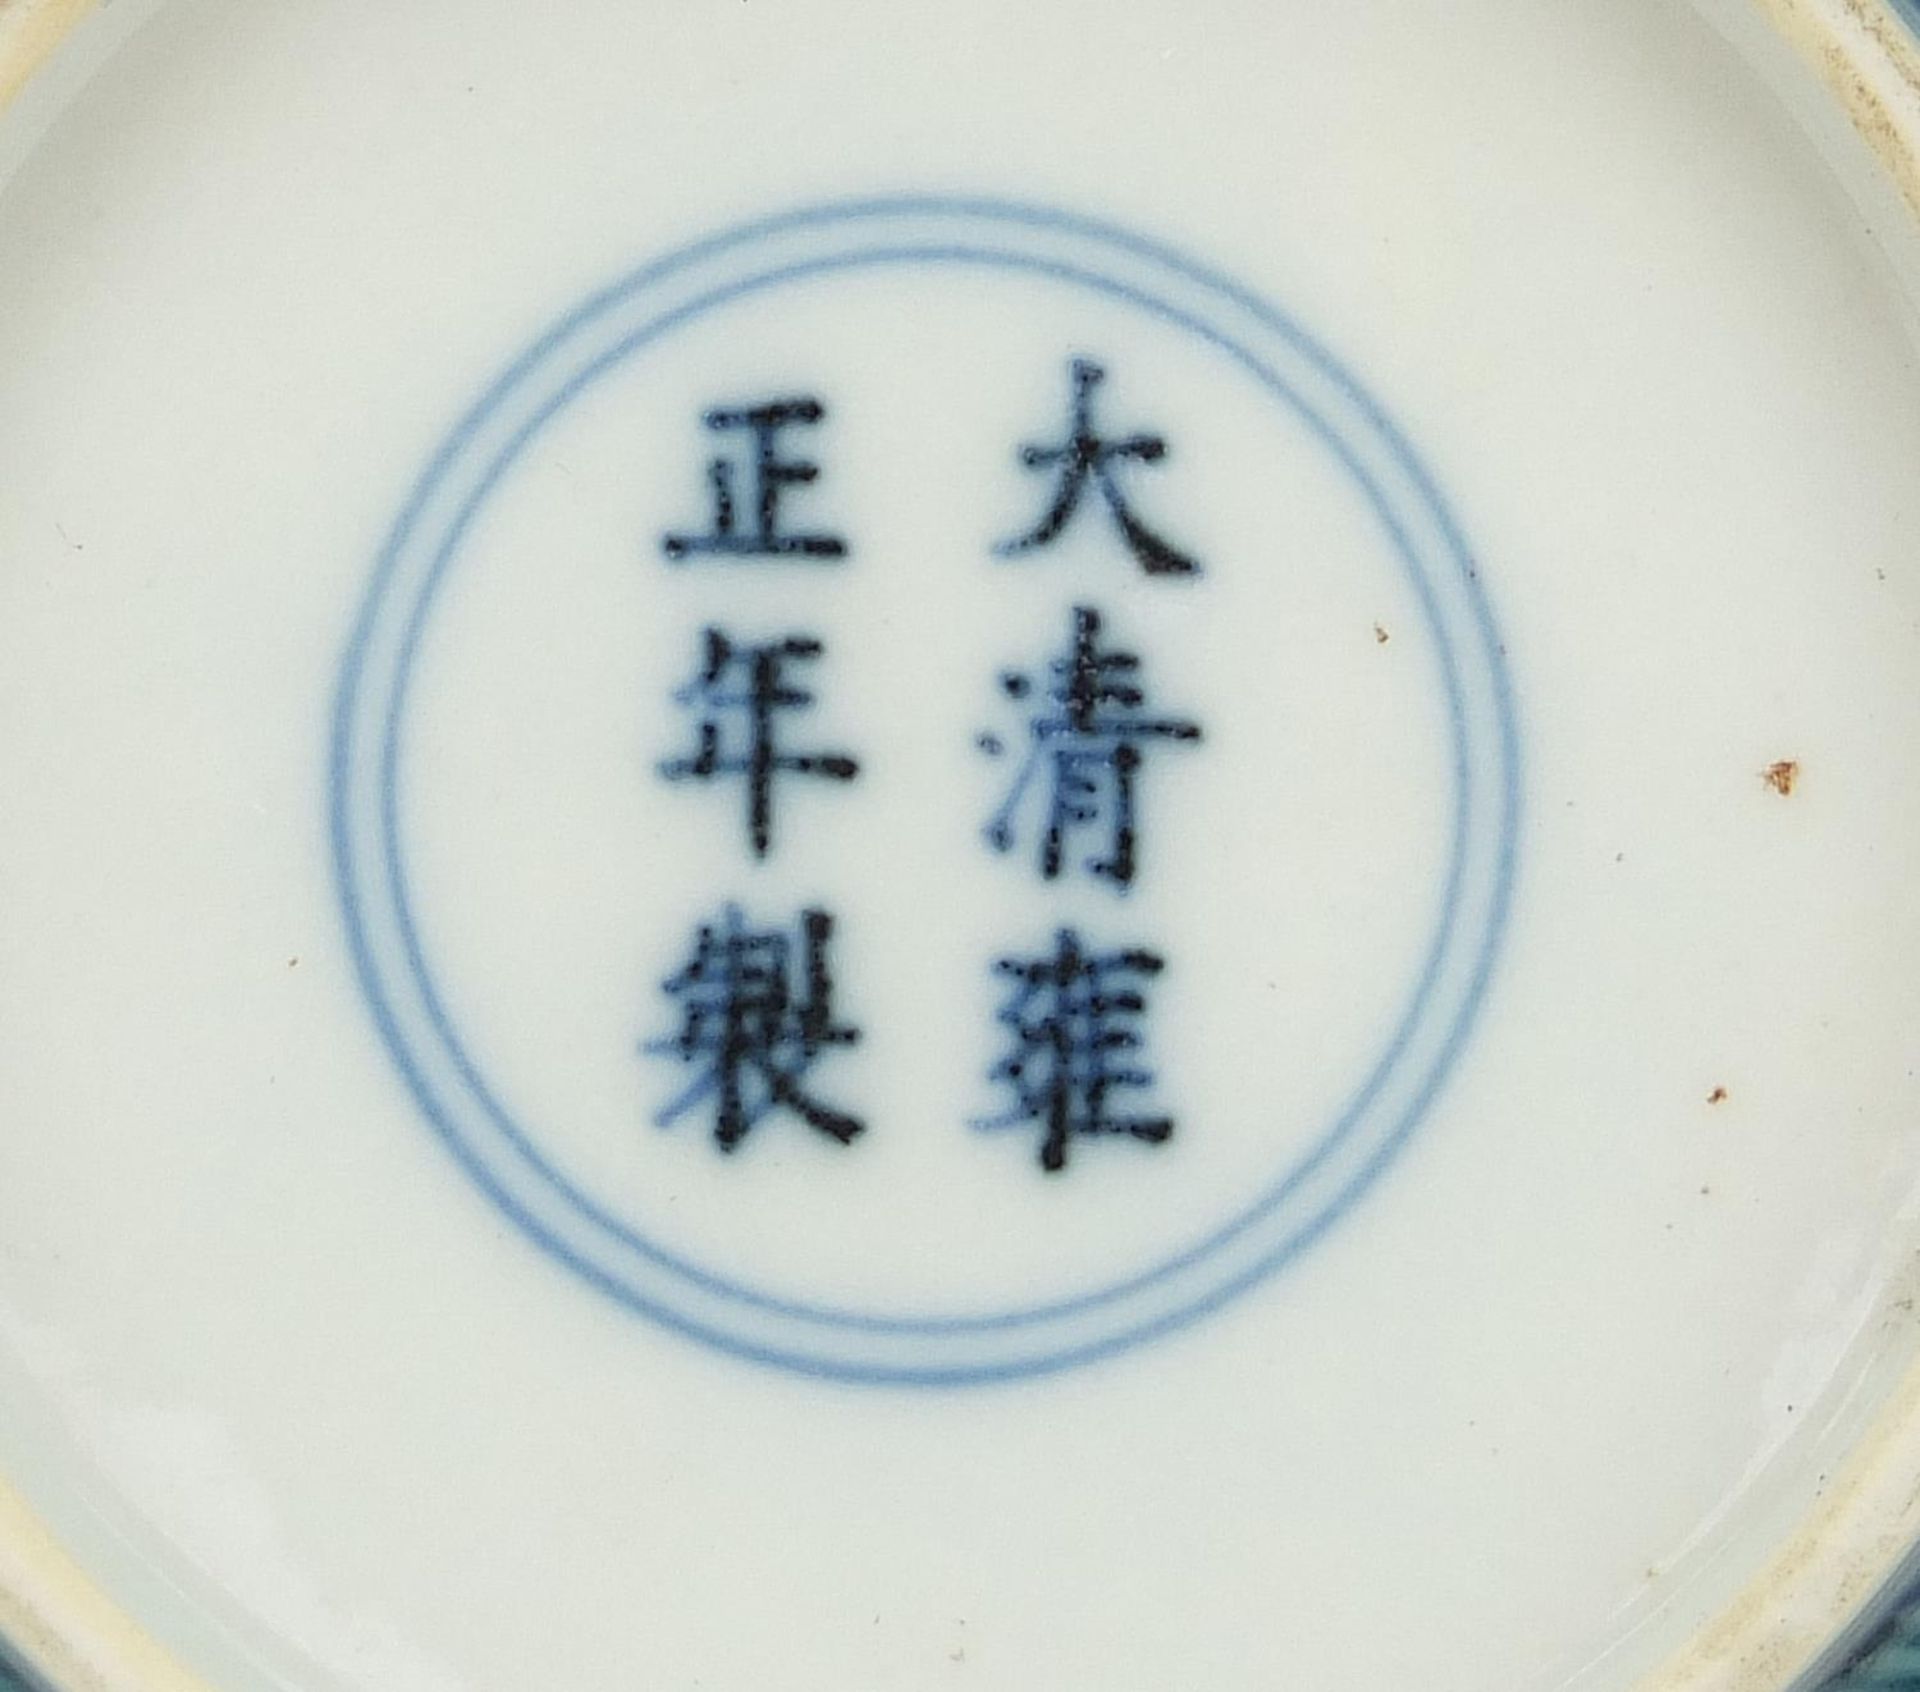 Chinese doucai porcelain dish hand painted with a dragon amongst clouds, six figure character - Image 3 of 4